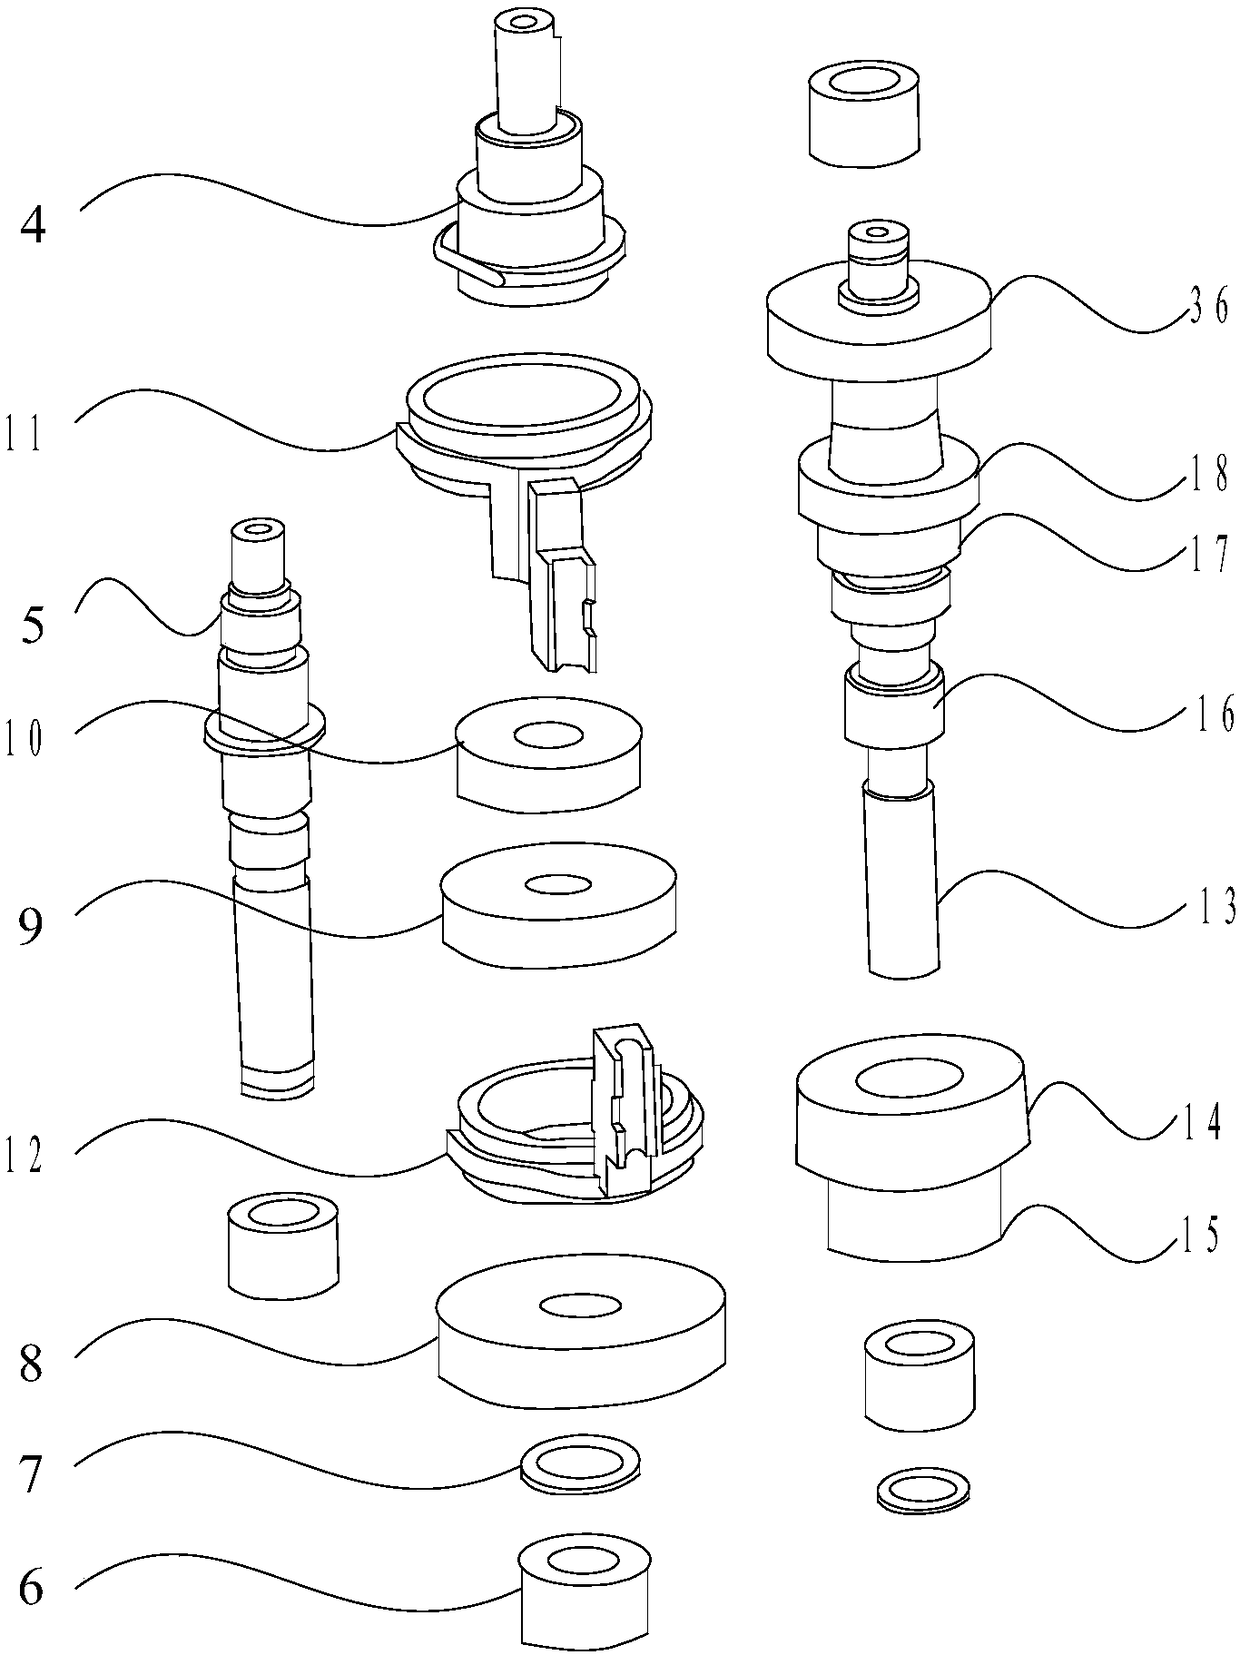 Drive axle assembly of variable-speed electric vehicle